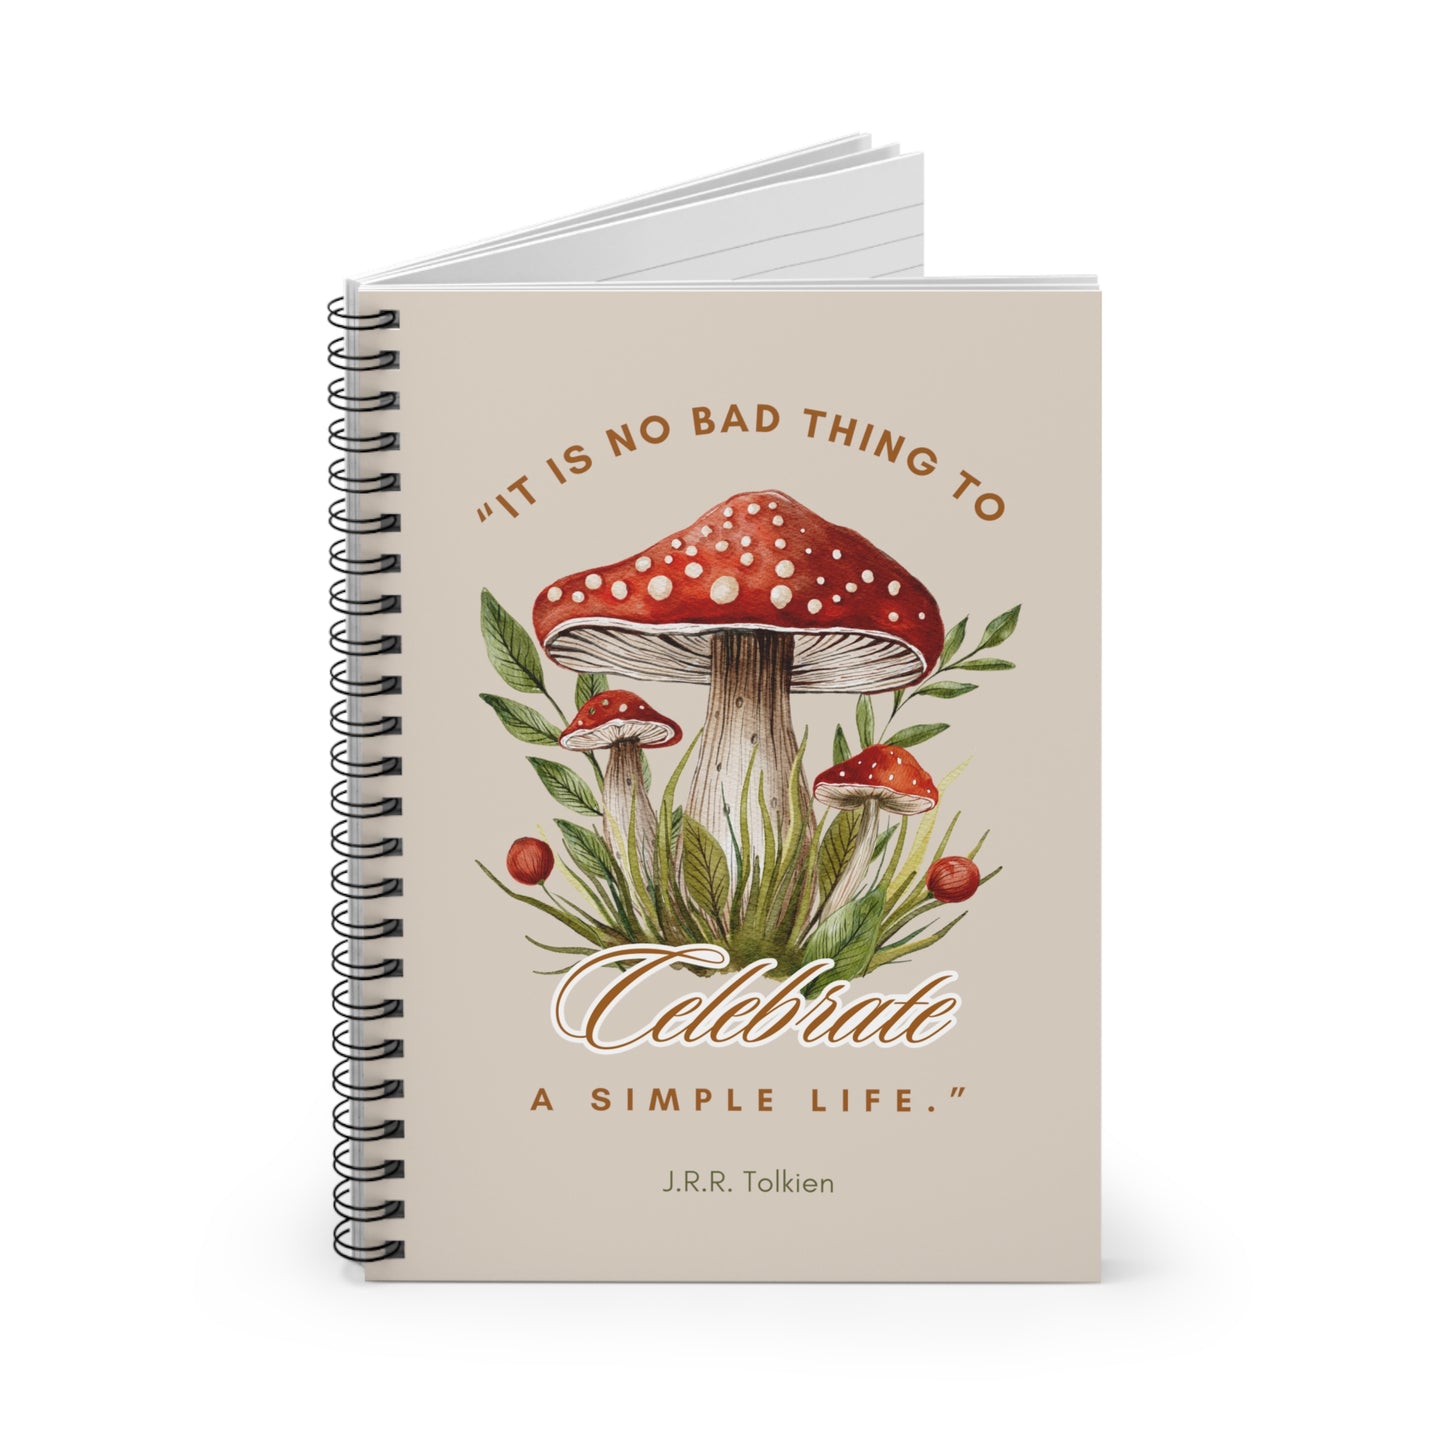 Celebrate a Simple Life Spiral Notebook - Lord of the Rings Quote